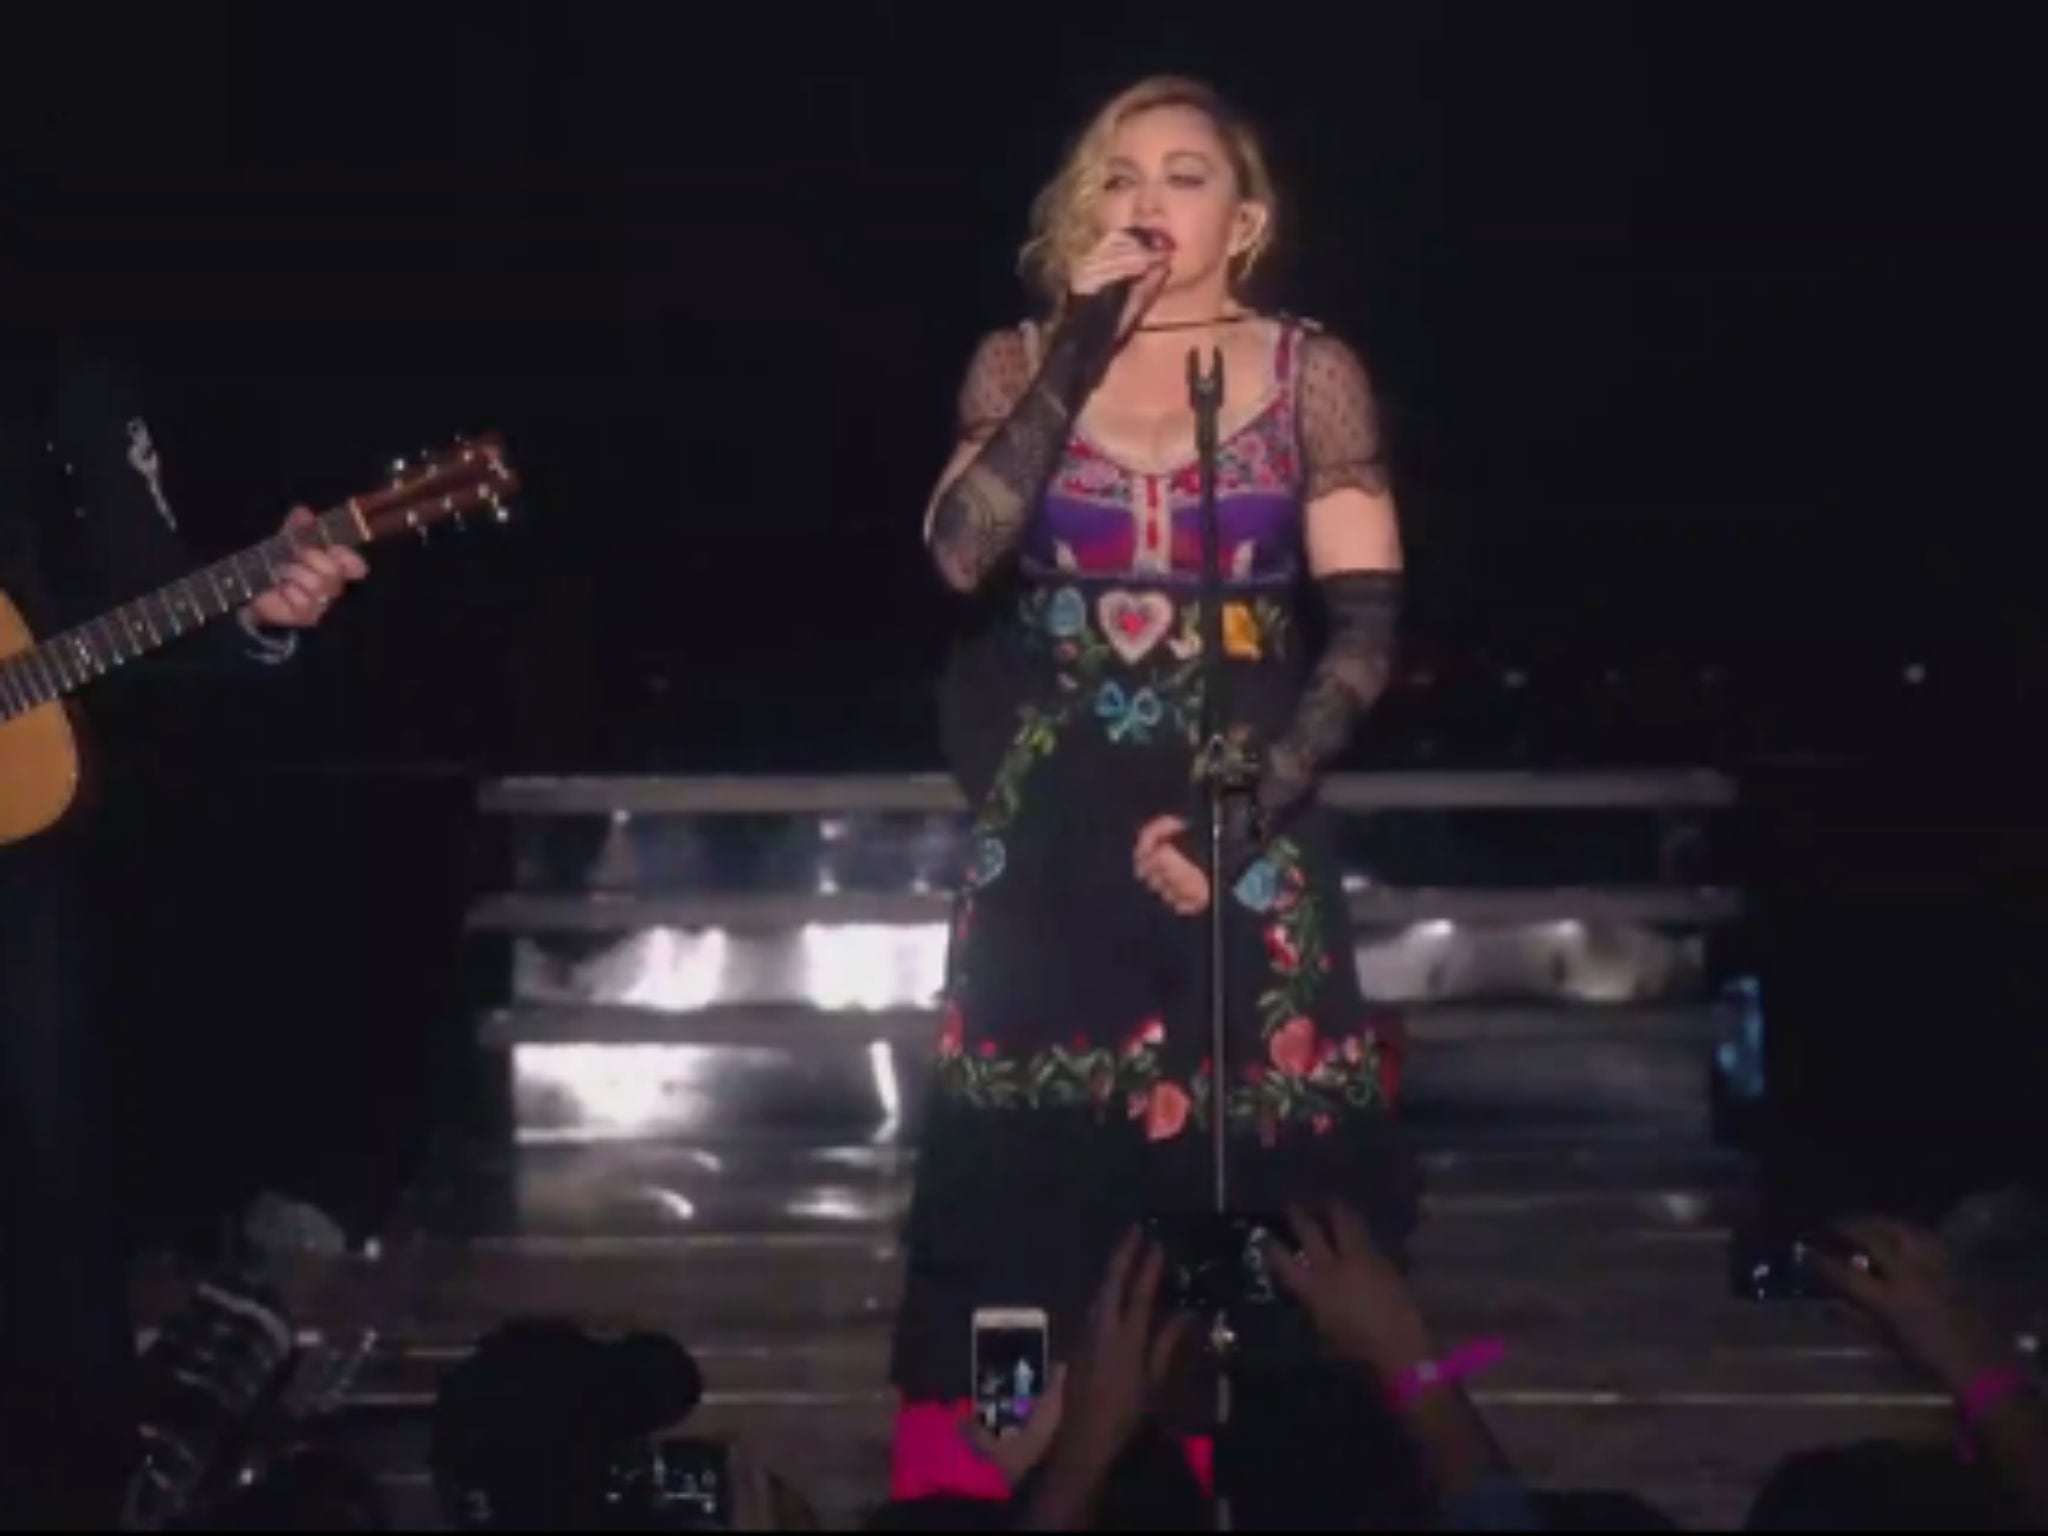 Madonna stopped a concert in Stockholm on Saturday to respond to the tragedy